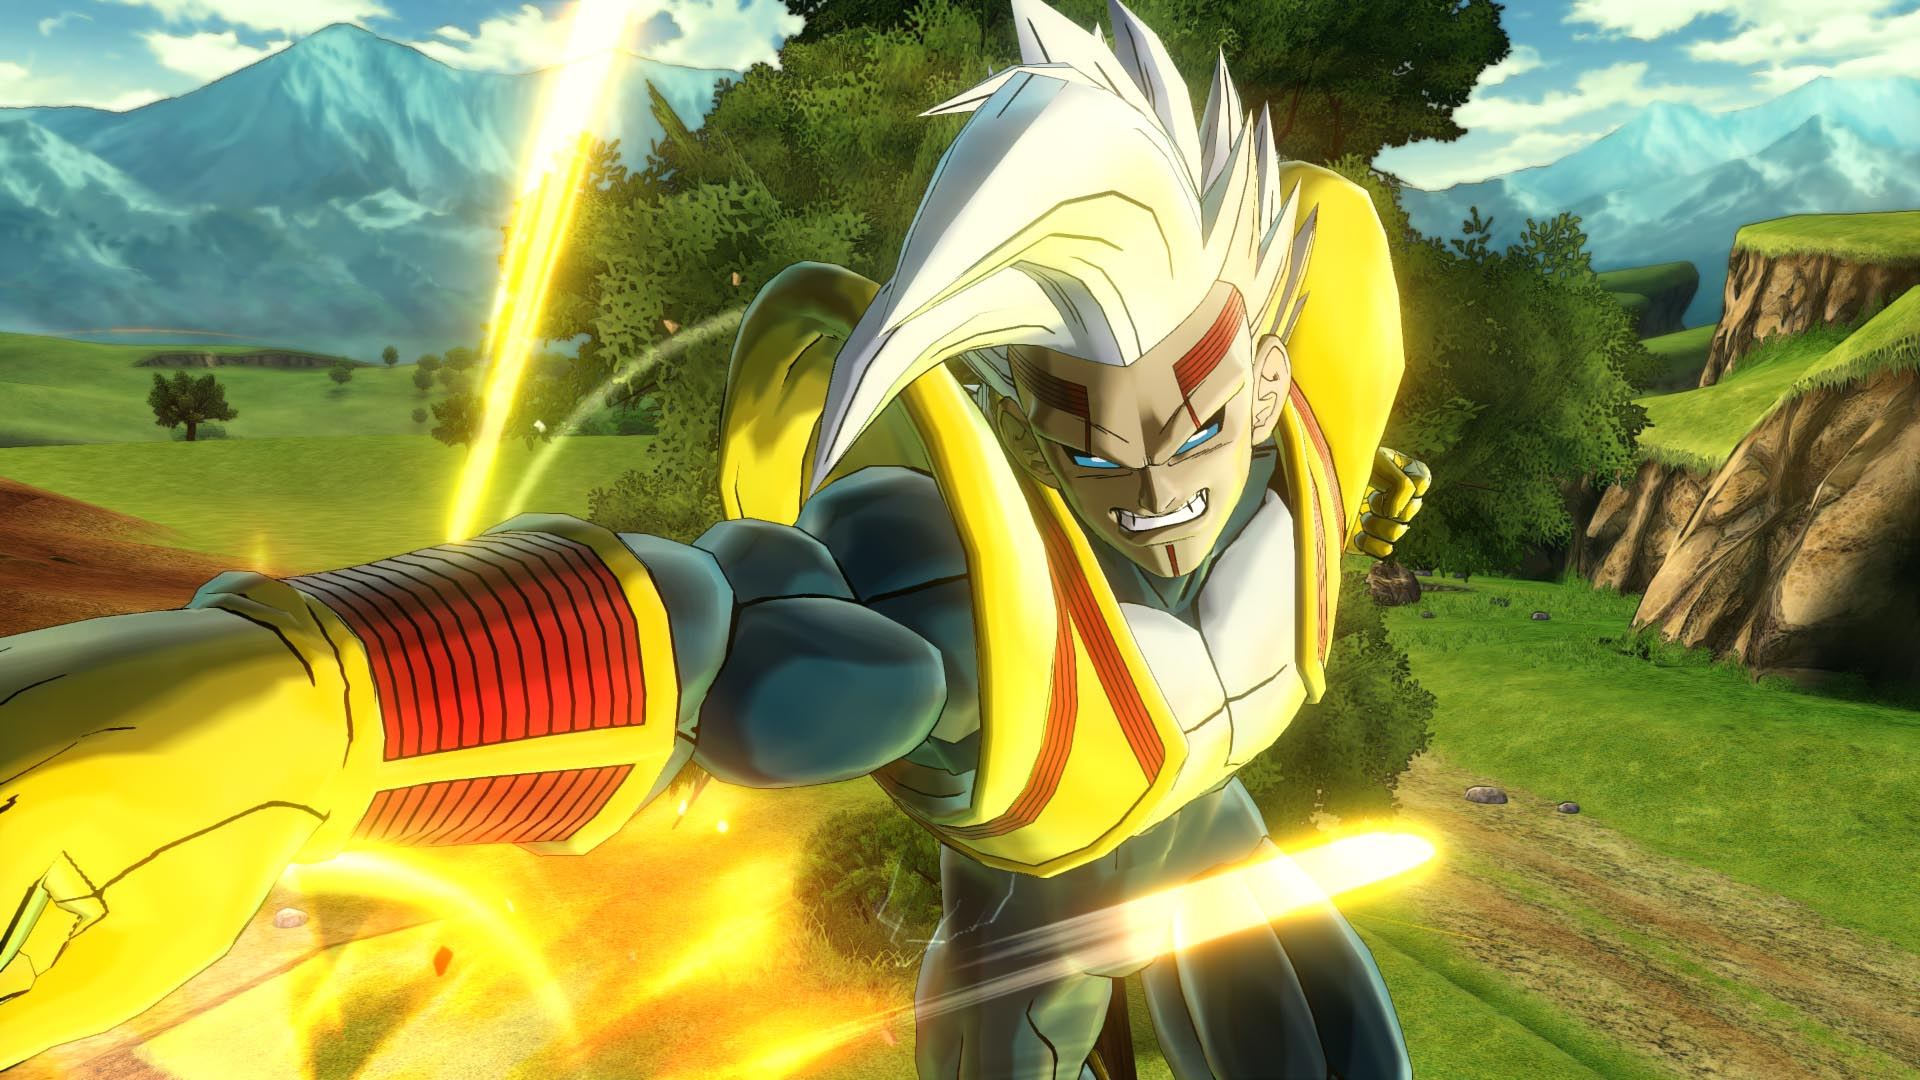 DRAGON BALL XENOVERSE 2 - Extra DLC Pack 3 on Steam